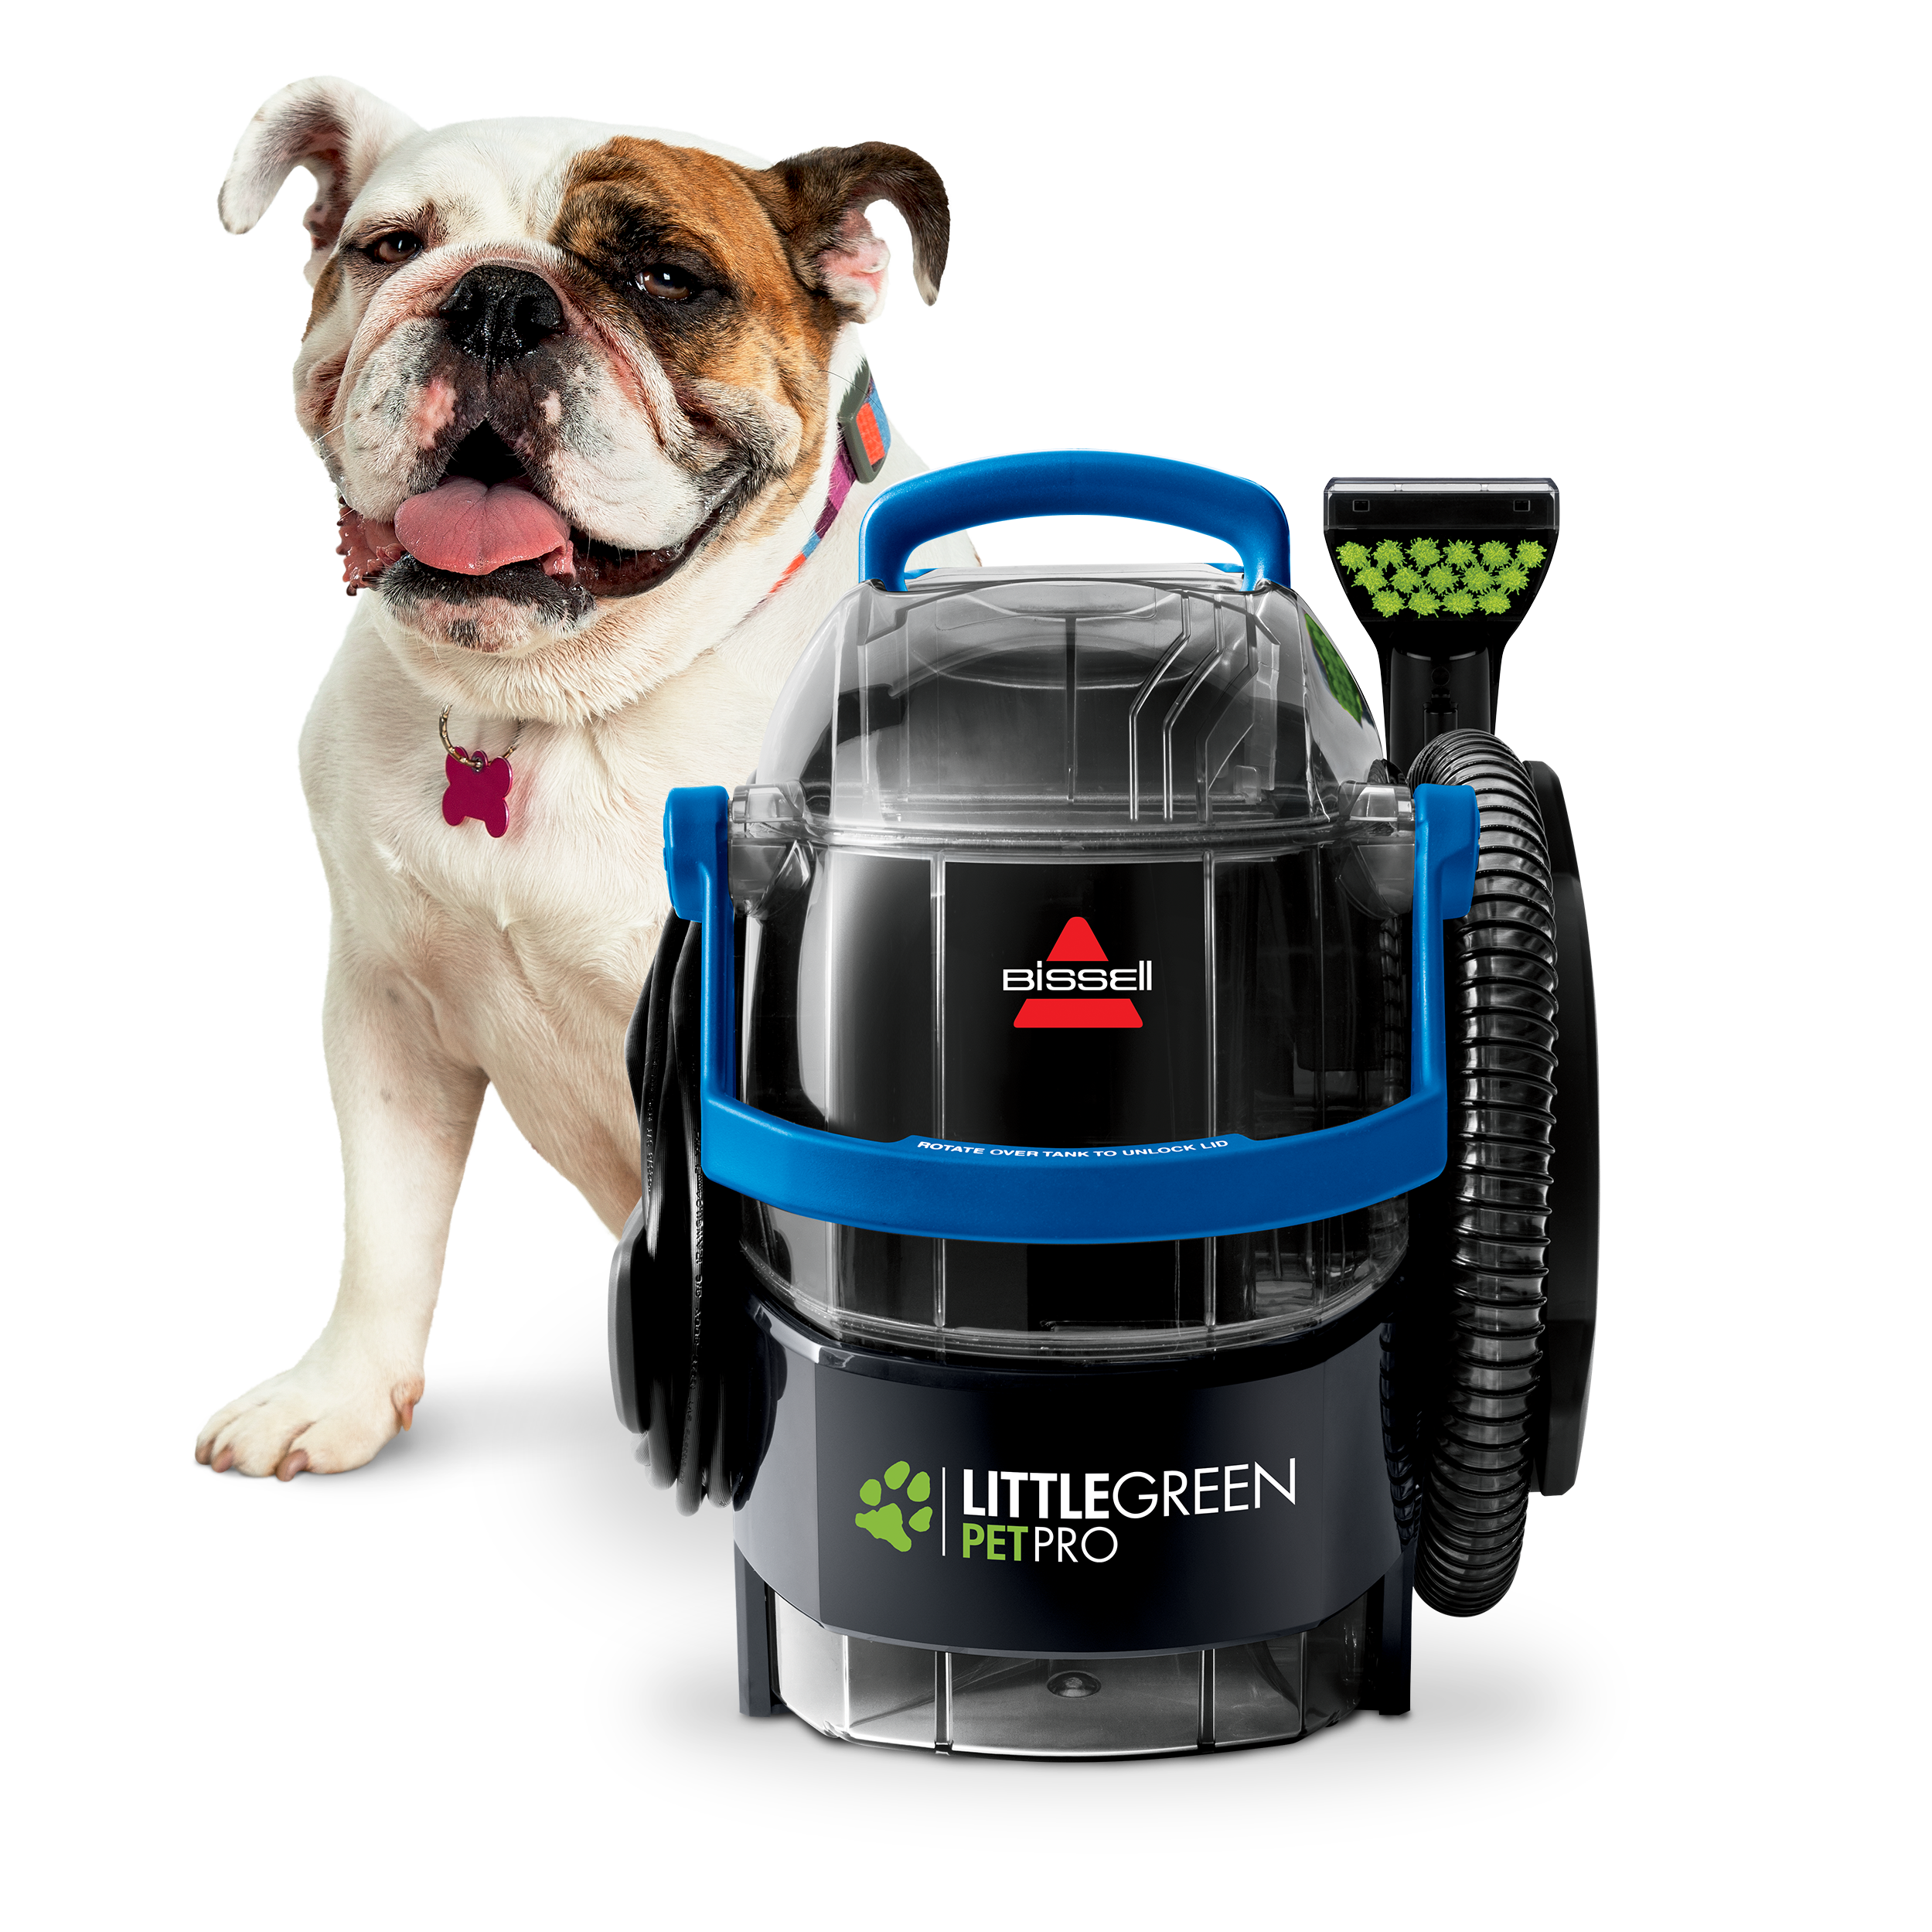 Bissell SpotClean Pet Pro Portable Bagless Carpet Deep Cleaner & Reviews